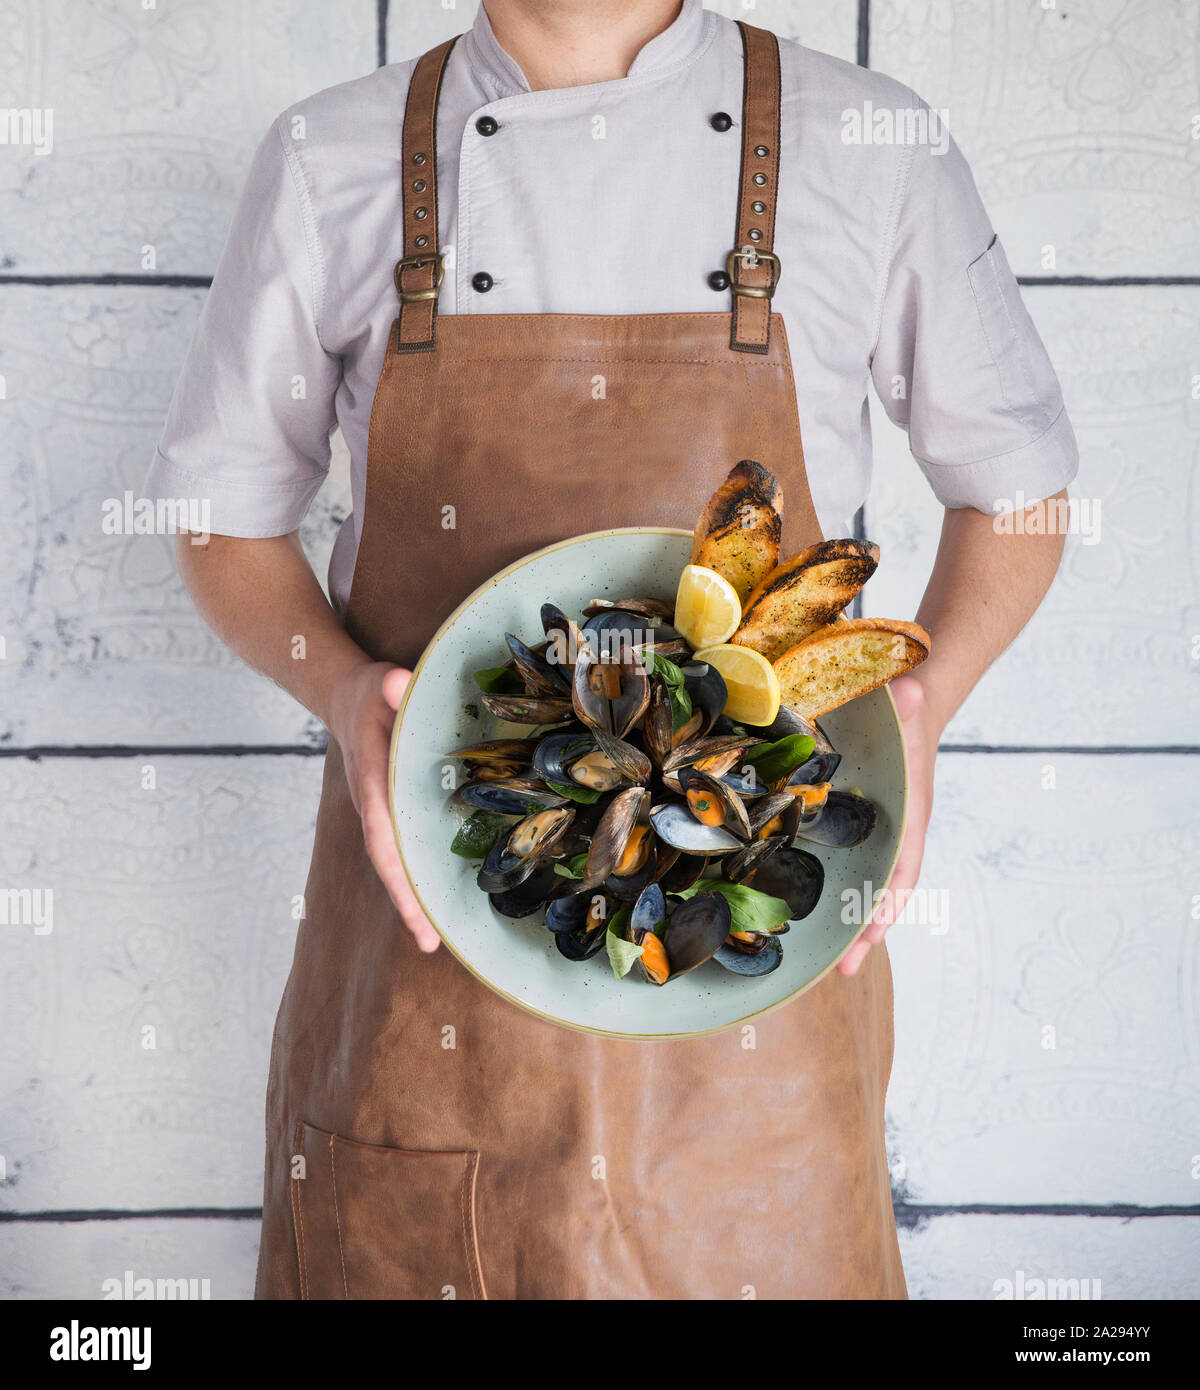 The chef keeps a plate with mussels vertically Stock Photo